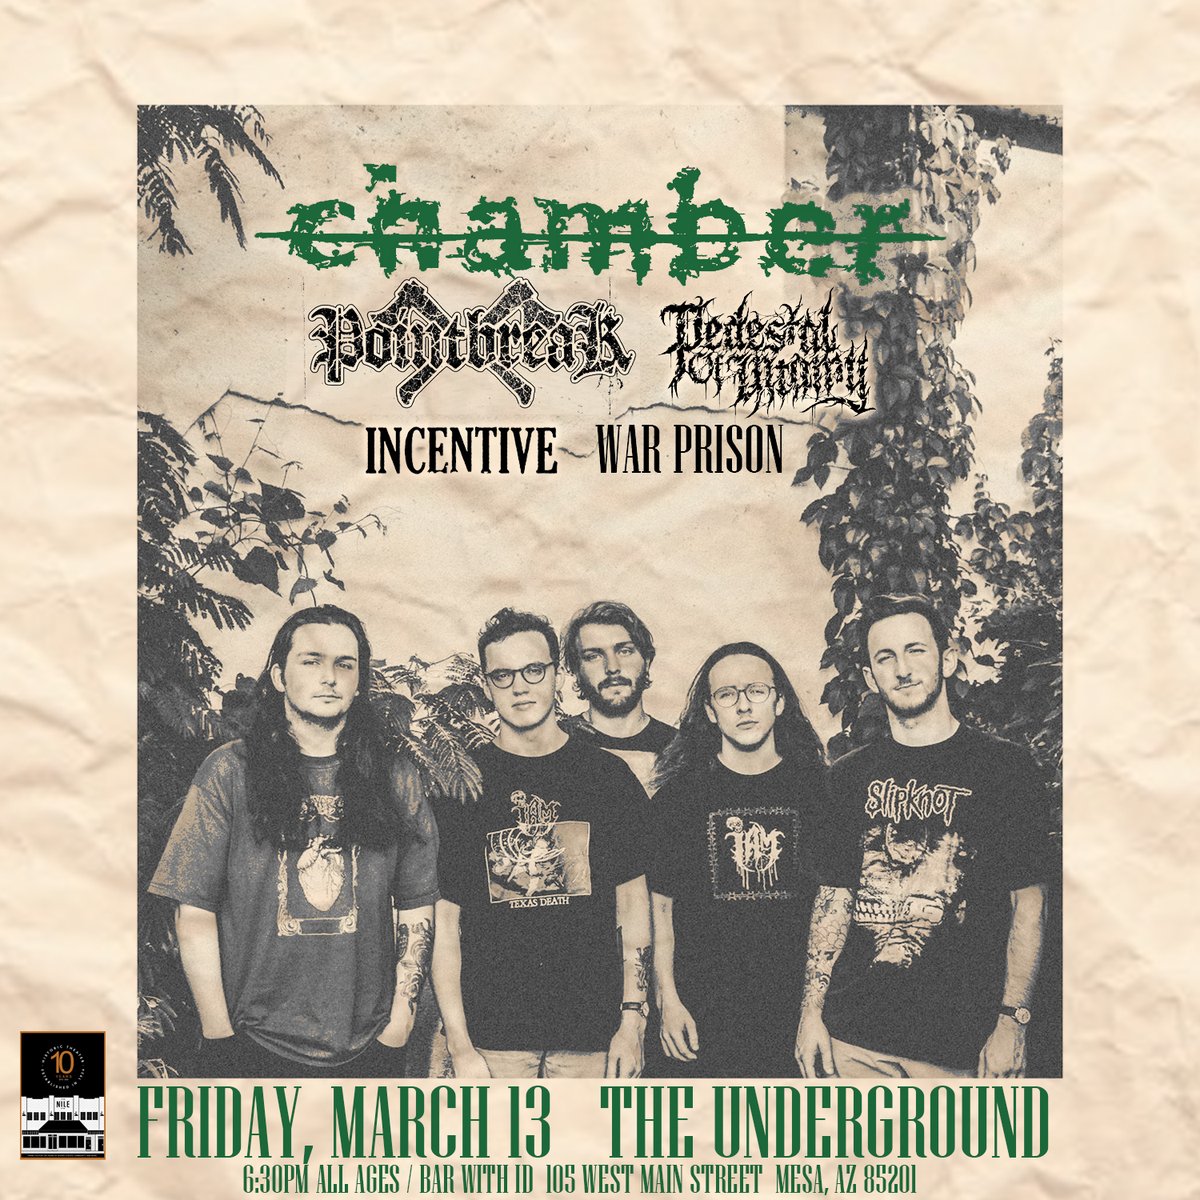 Chamber is making a stop at The Nile next month! You should get your tickets while you still can! niletheater.com #azhc #arizonahardcore #chamber #localaz #azmusic #arizonashows #mesaaz #azlife